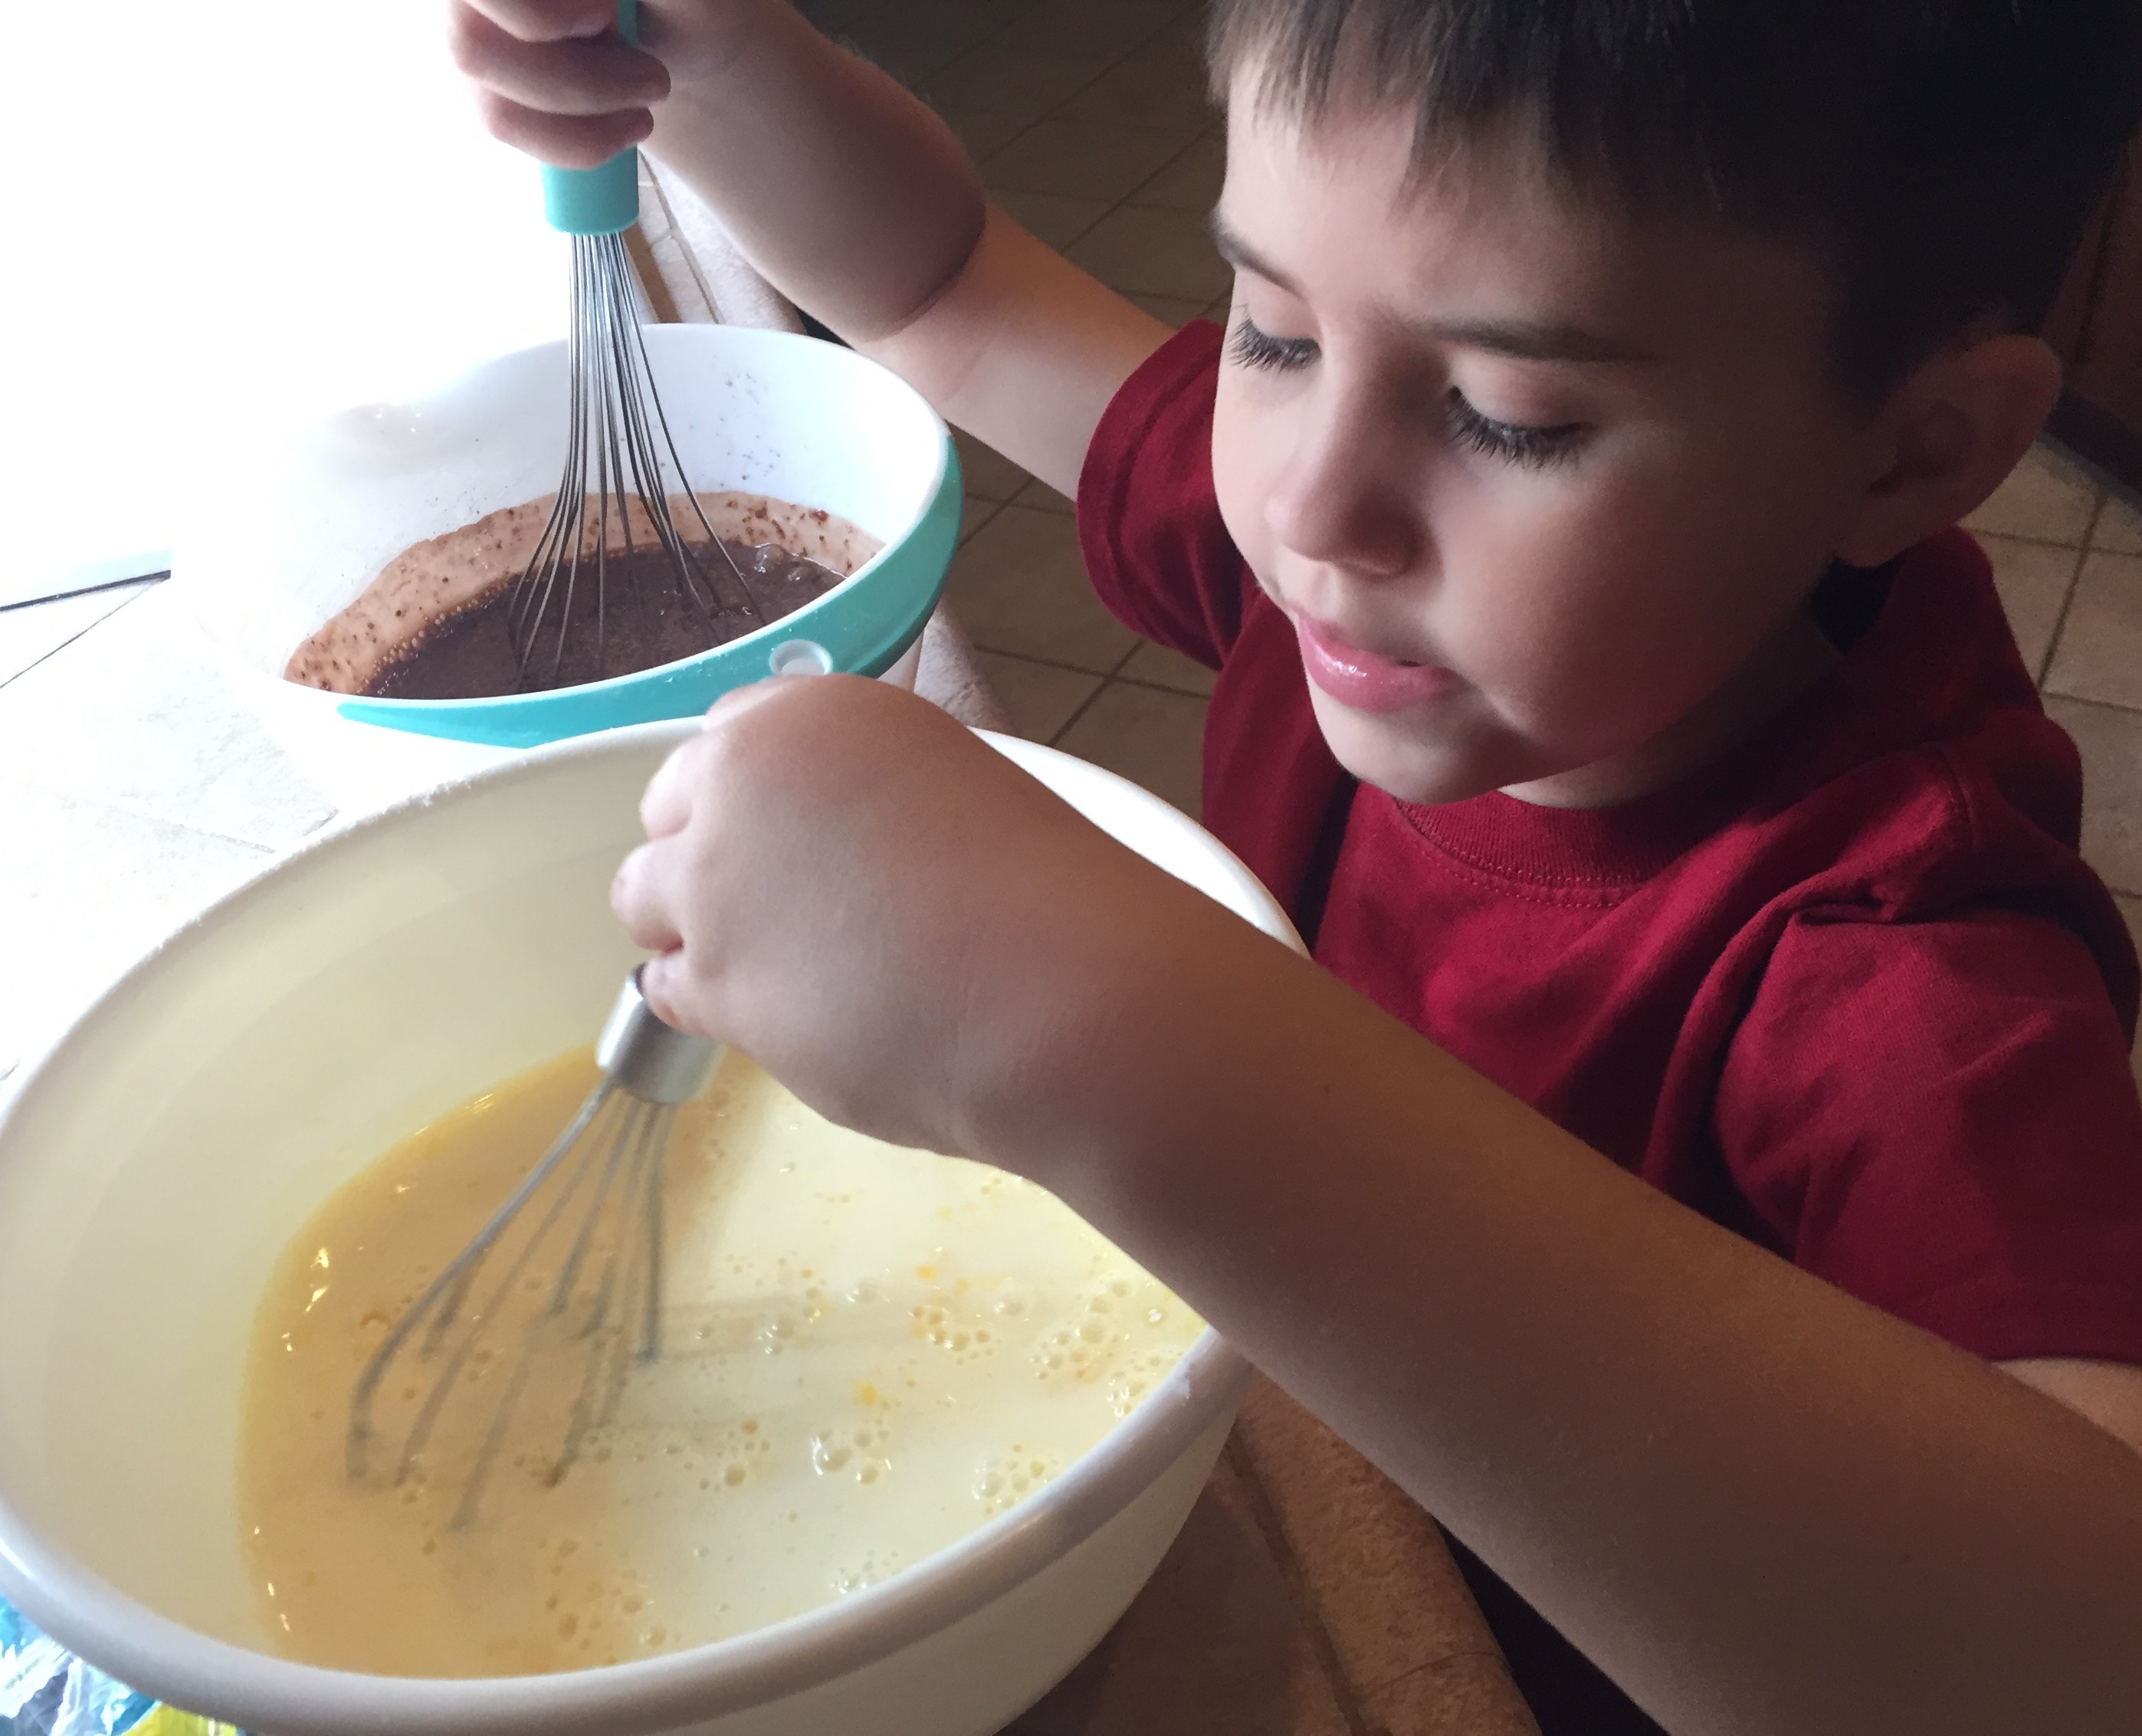 JT wanted to stir both puddings at the same time.